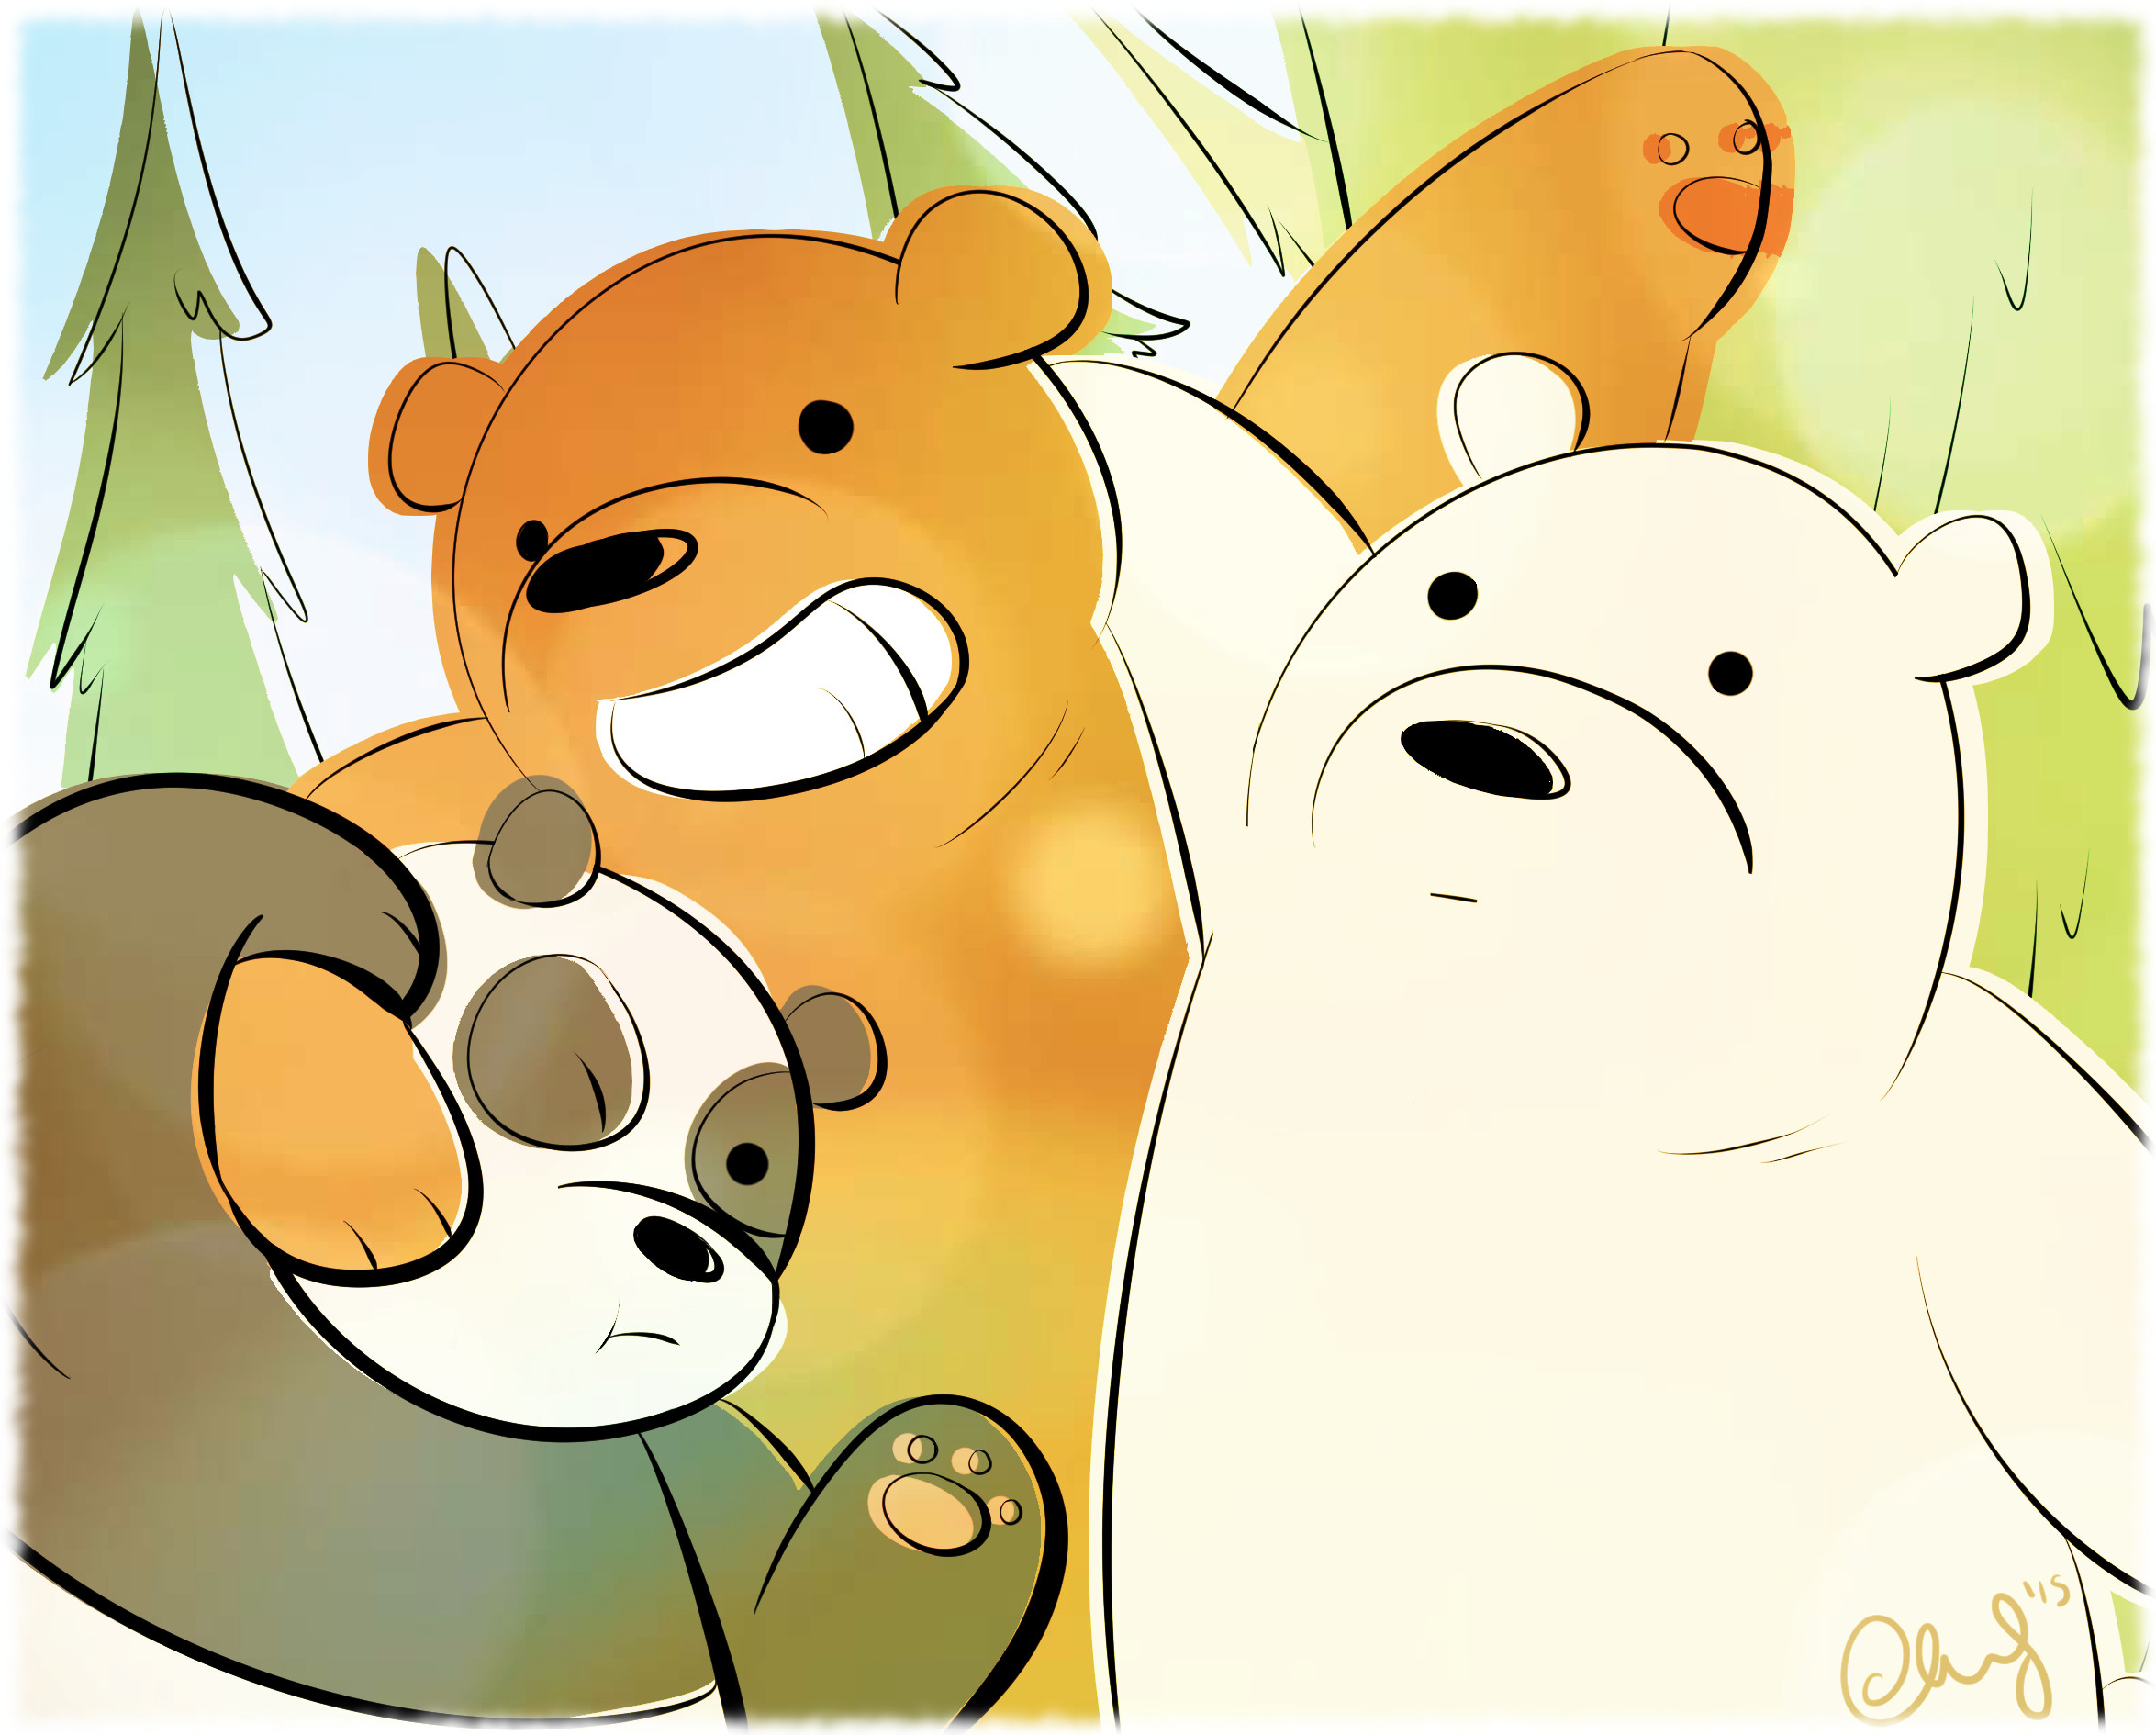 We Bare Bears by ccucco We Bare Bears by ccucco